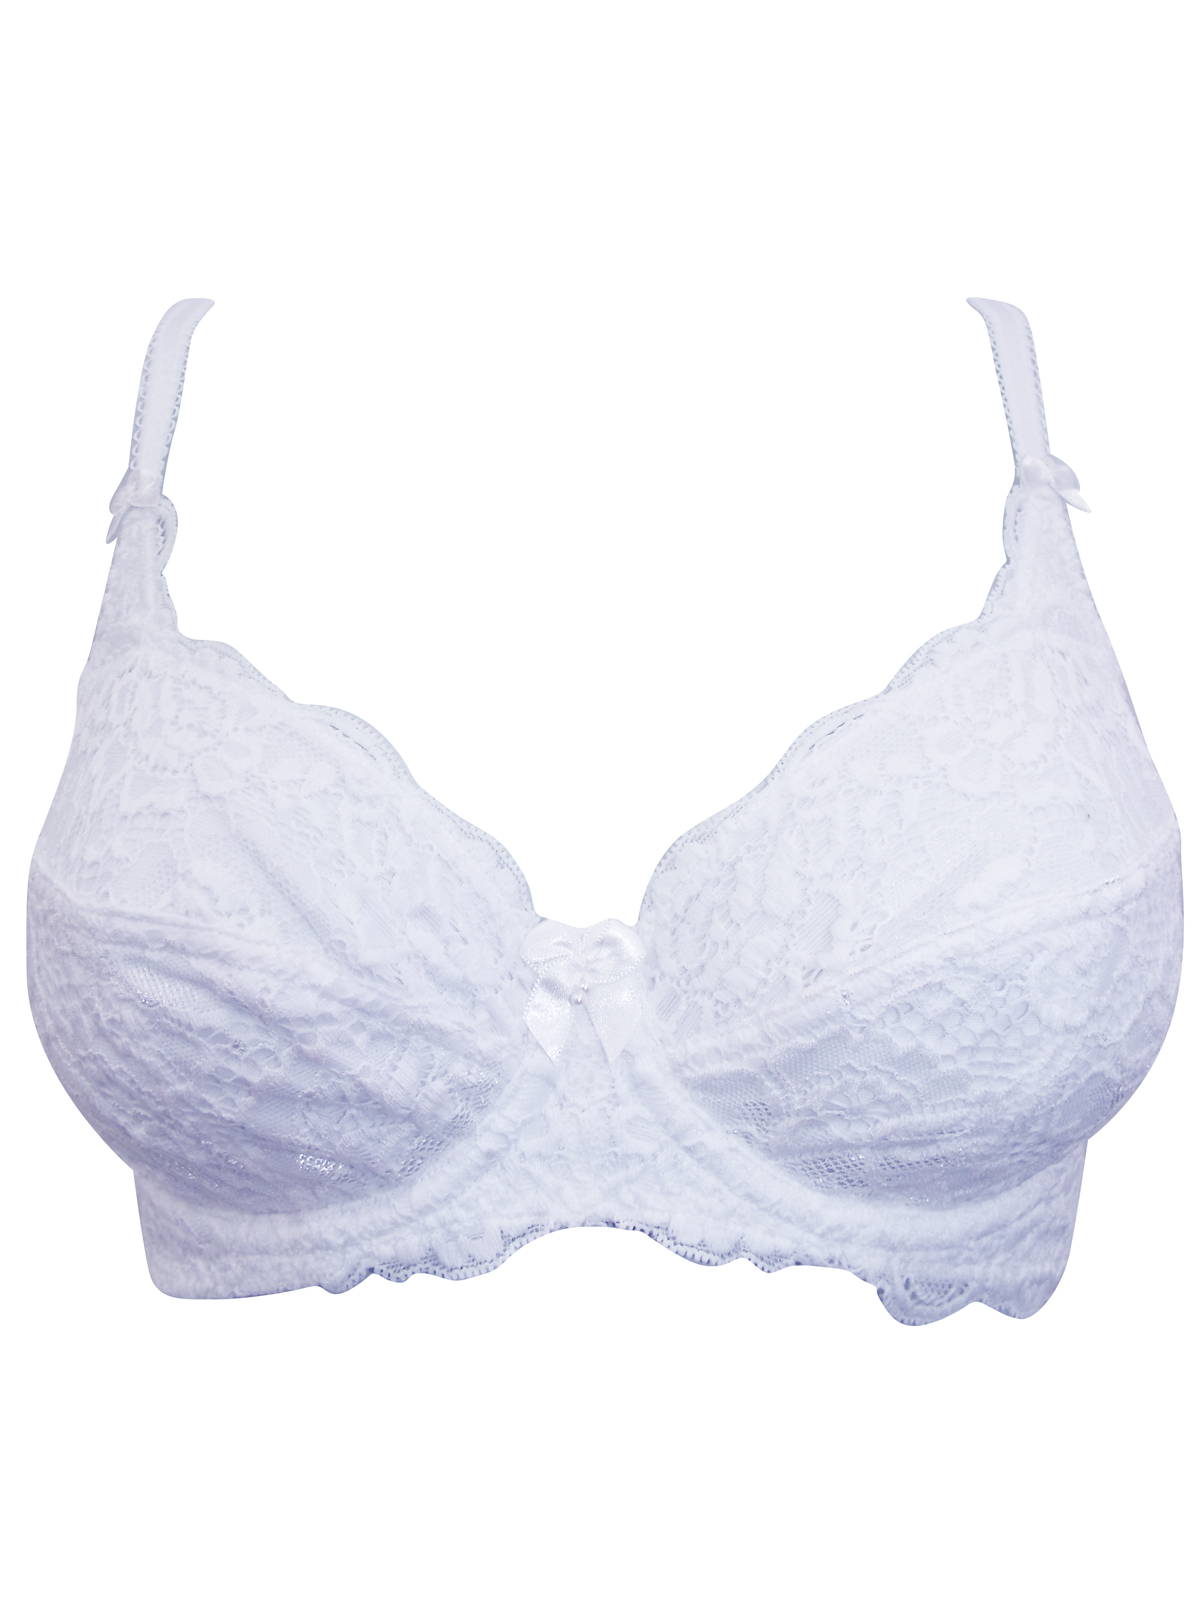 F&F - - WHITE Floral Lace Underwired Full Cup Bra - Size 34 to 40 (B-C ...